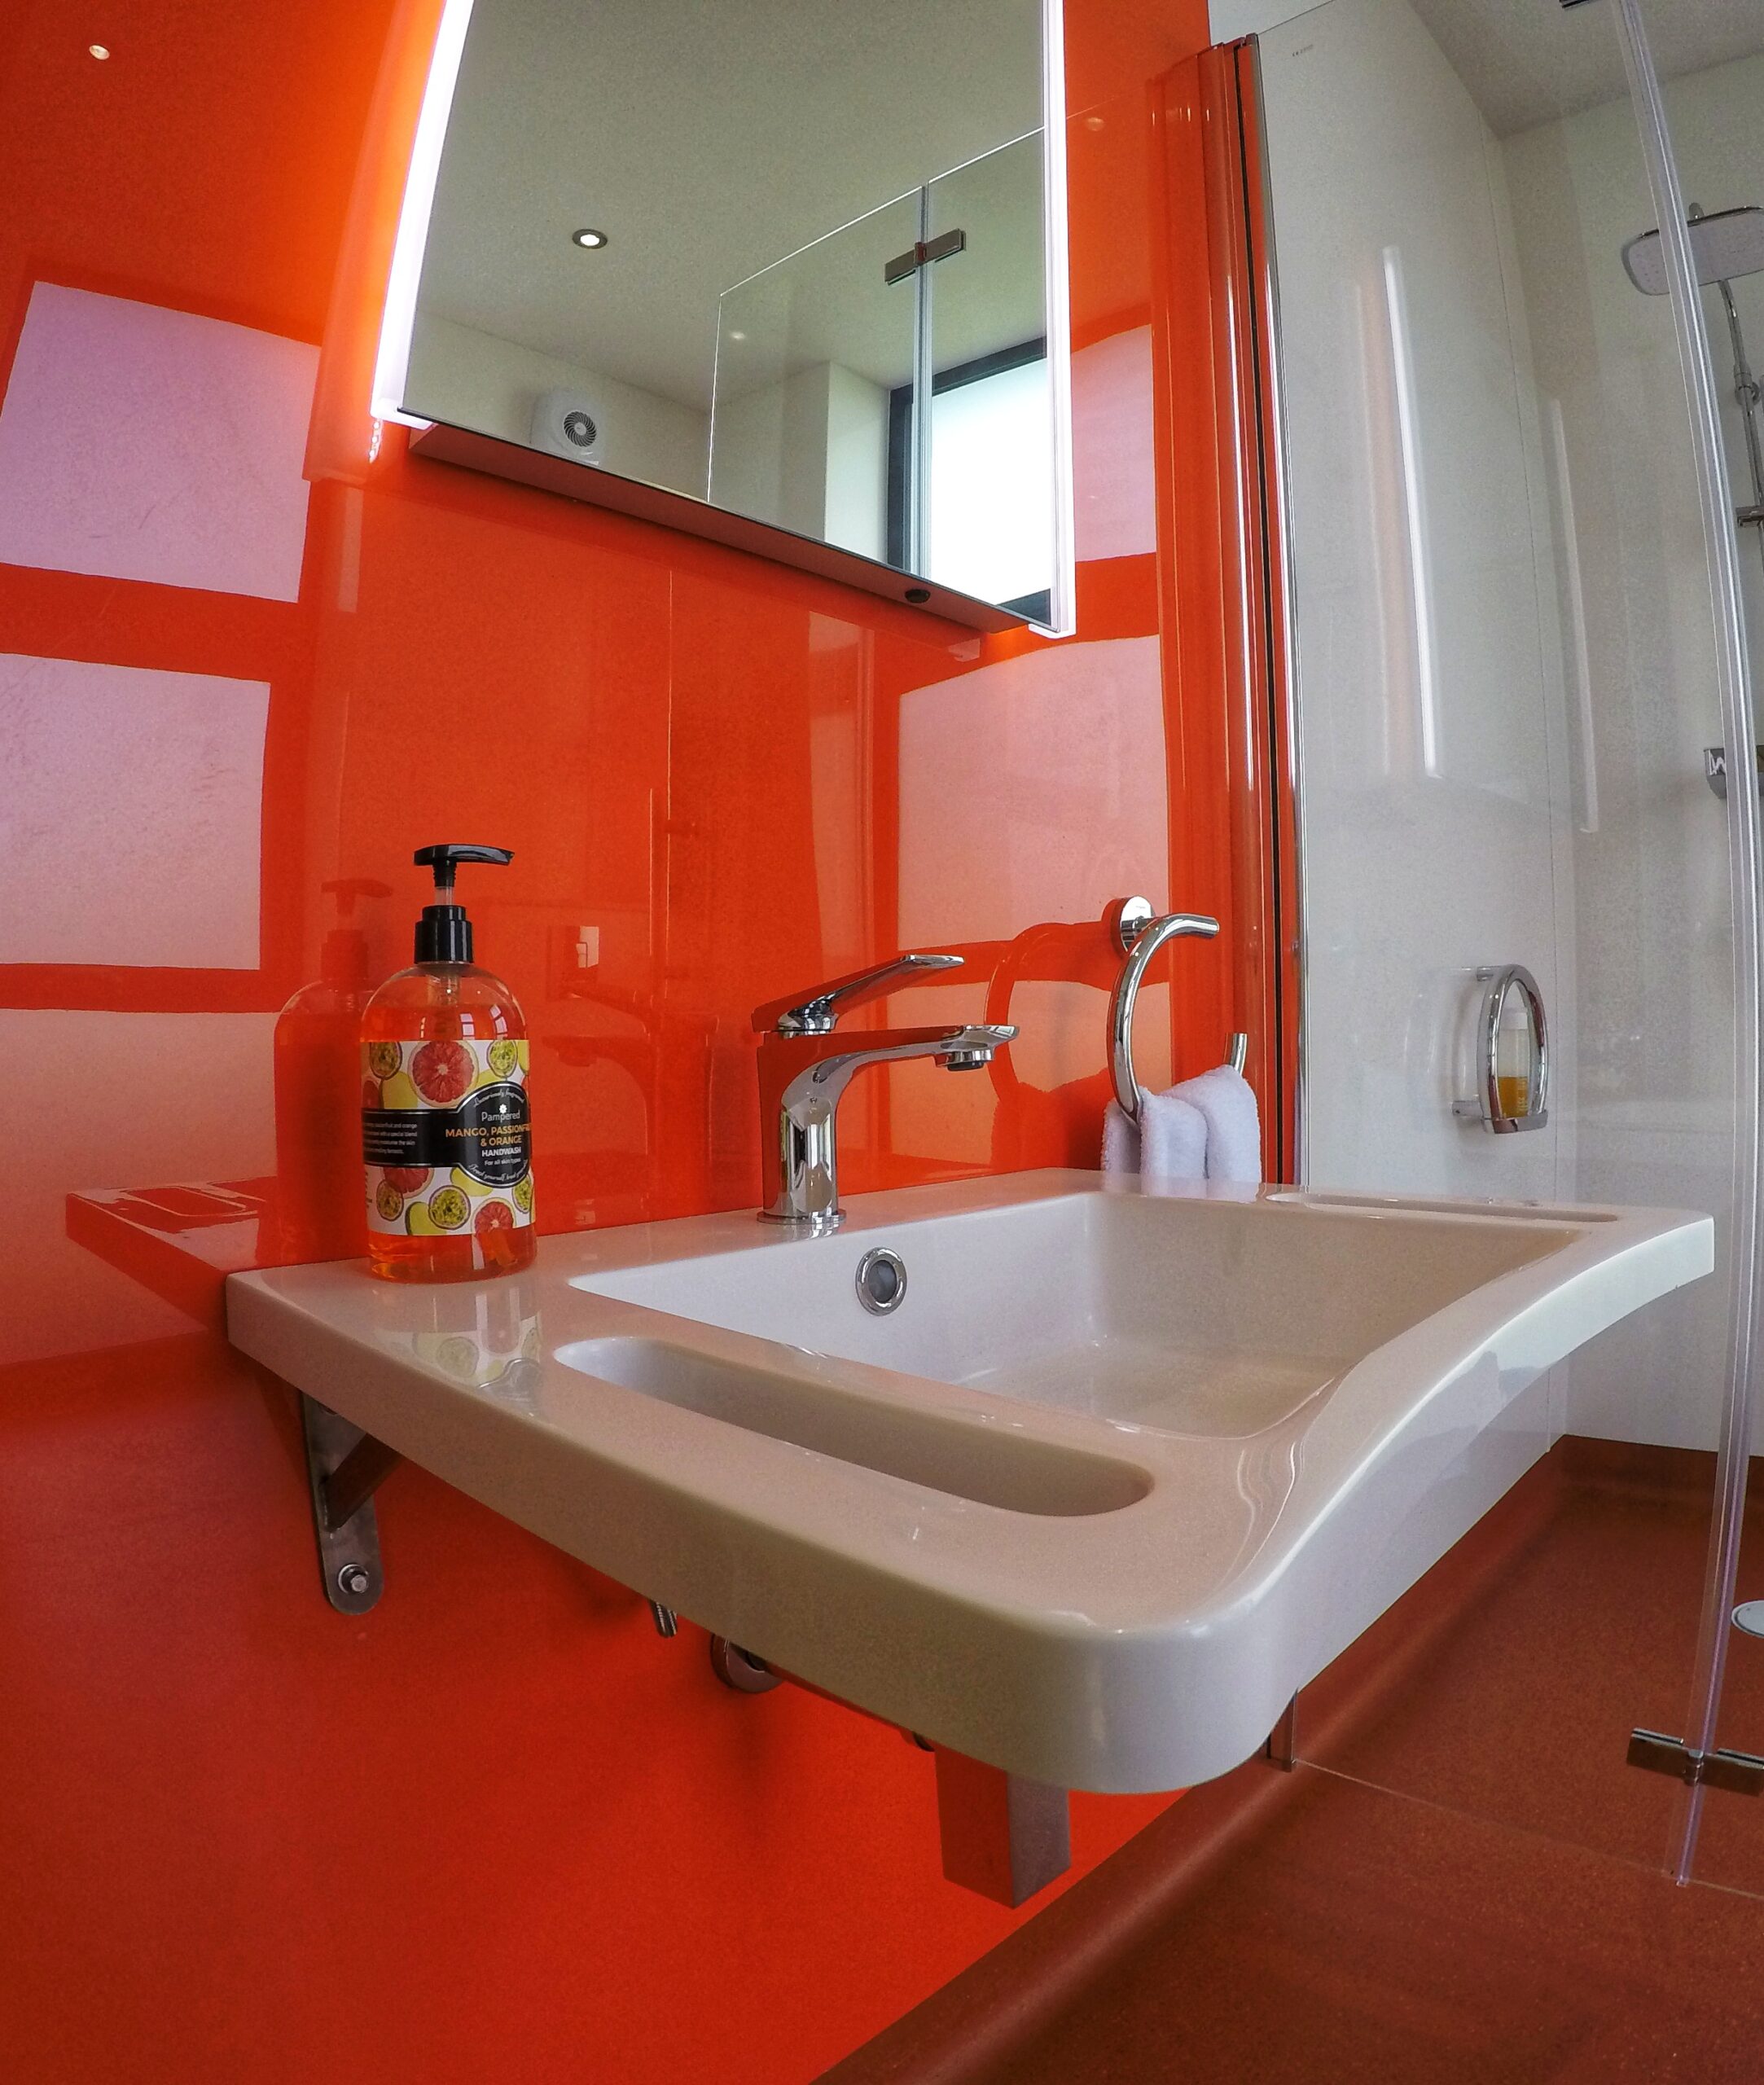 Wheelchair suitable basin with integrated grab rails set on bright orange panelled wall. Orange handwash and chrome towel rail. Folding shower screen. Mirror with sensor light.